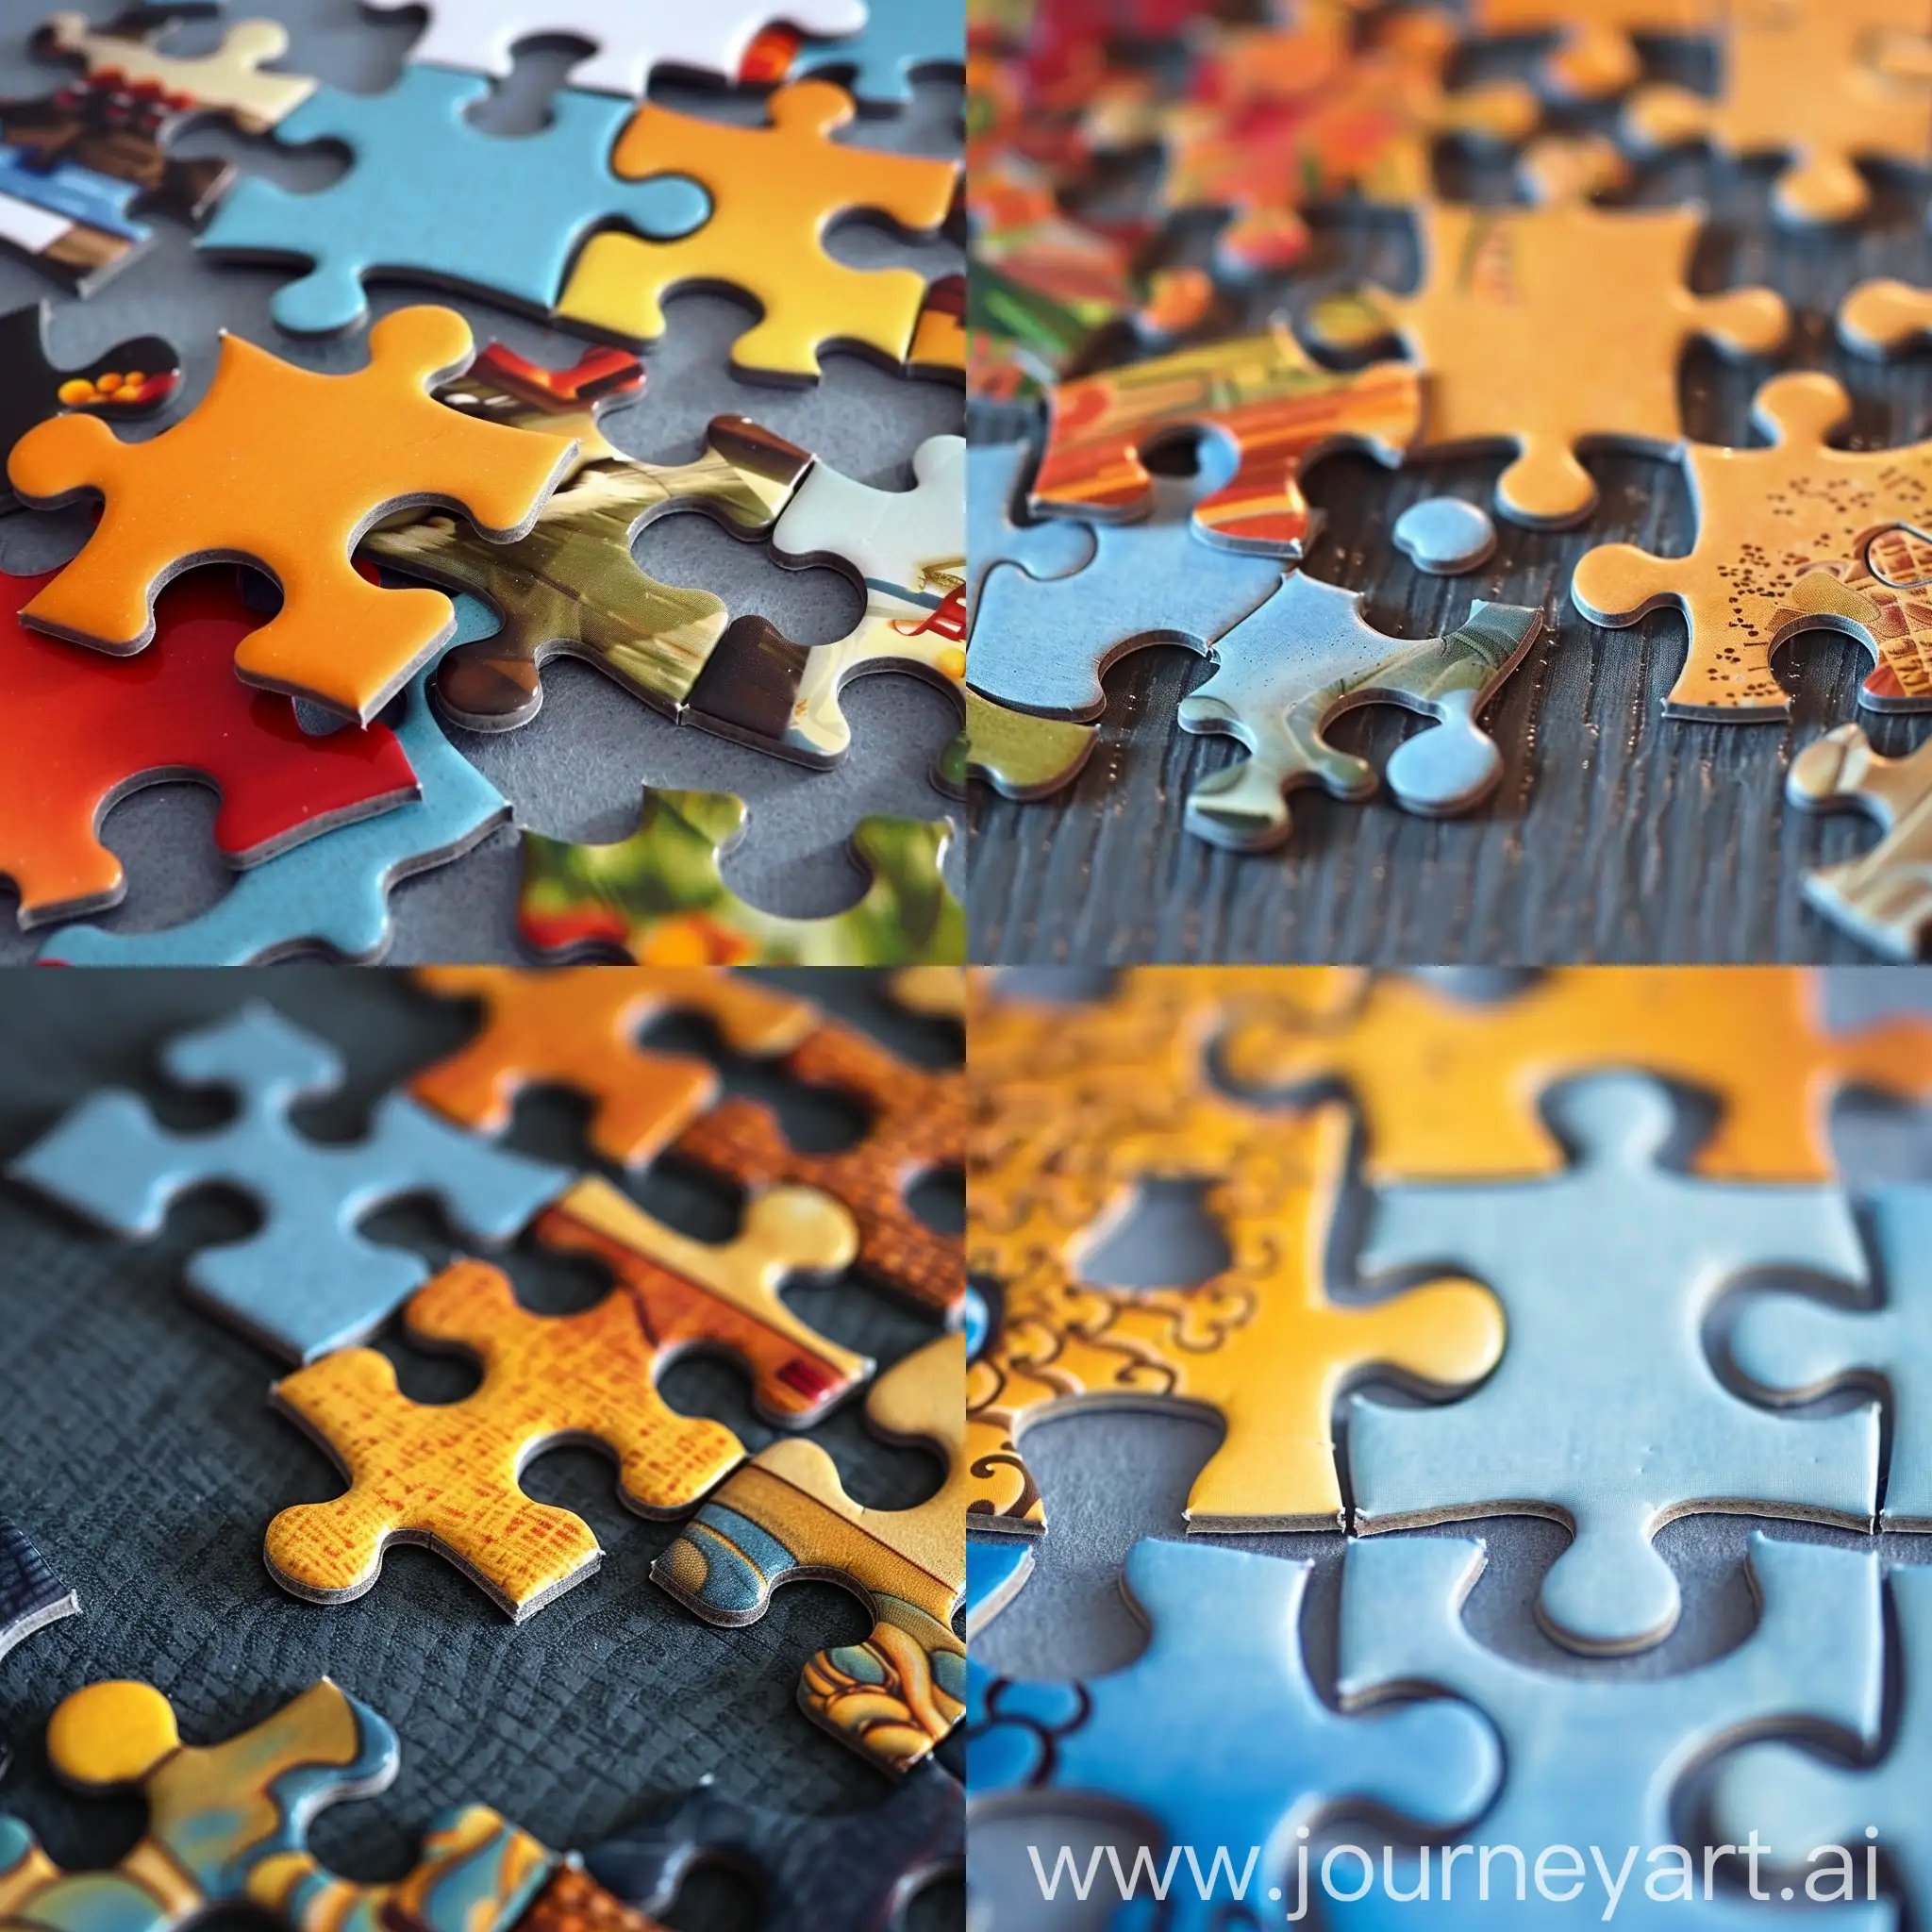 Colorful-Jigsaw-Puzzle-Pieces-Assembling-Together